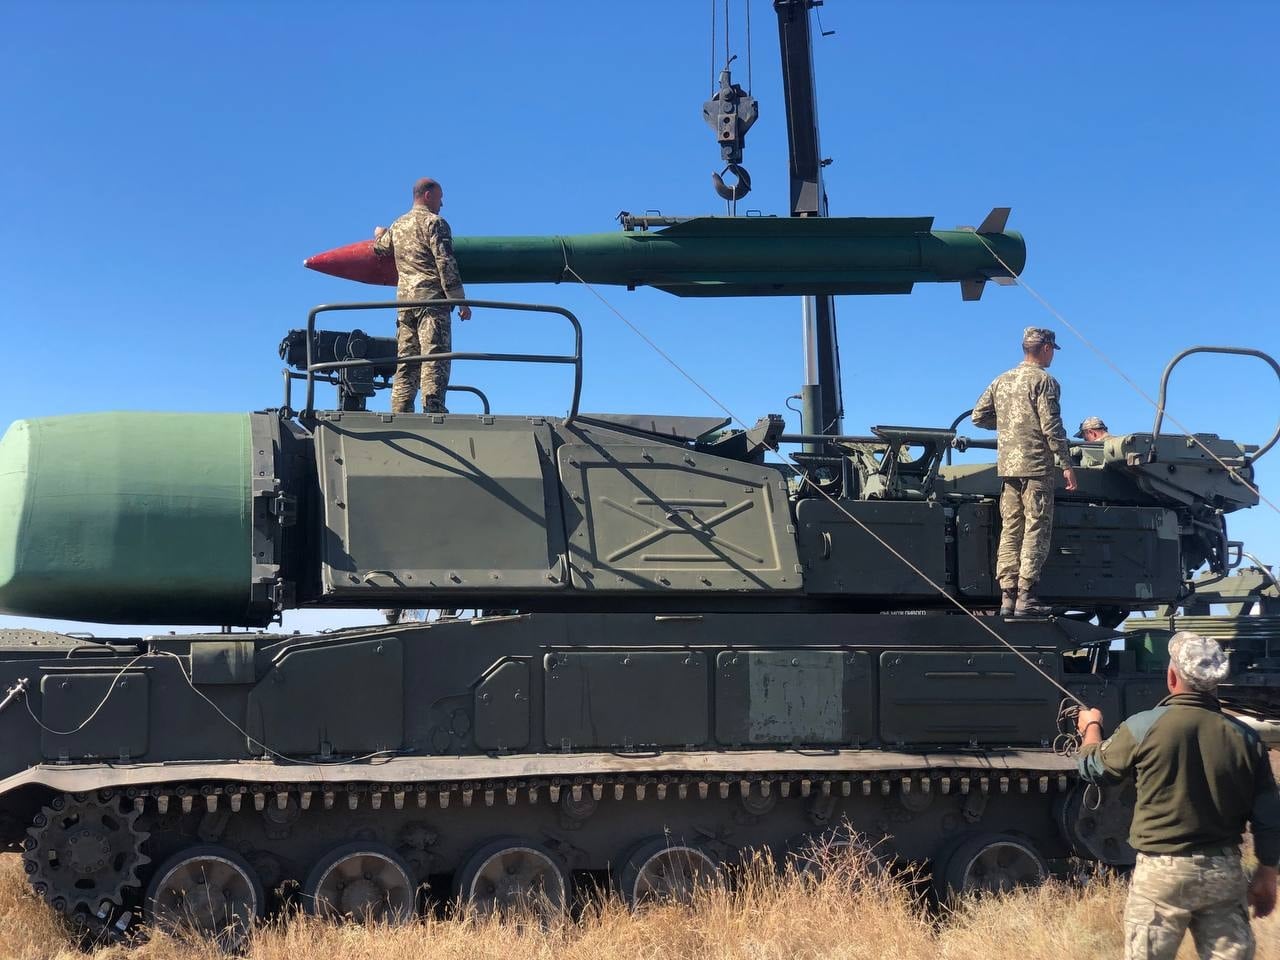 Loading of the 9M38 missile  into the Buk air defense system of the Air Force of the Armed Forces of Ukraine, US Media Told What Purpose Ukraine Need Sea Sparrow Missiles For, Defense Express